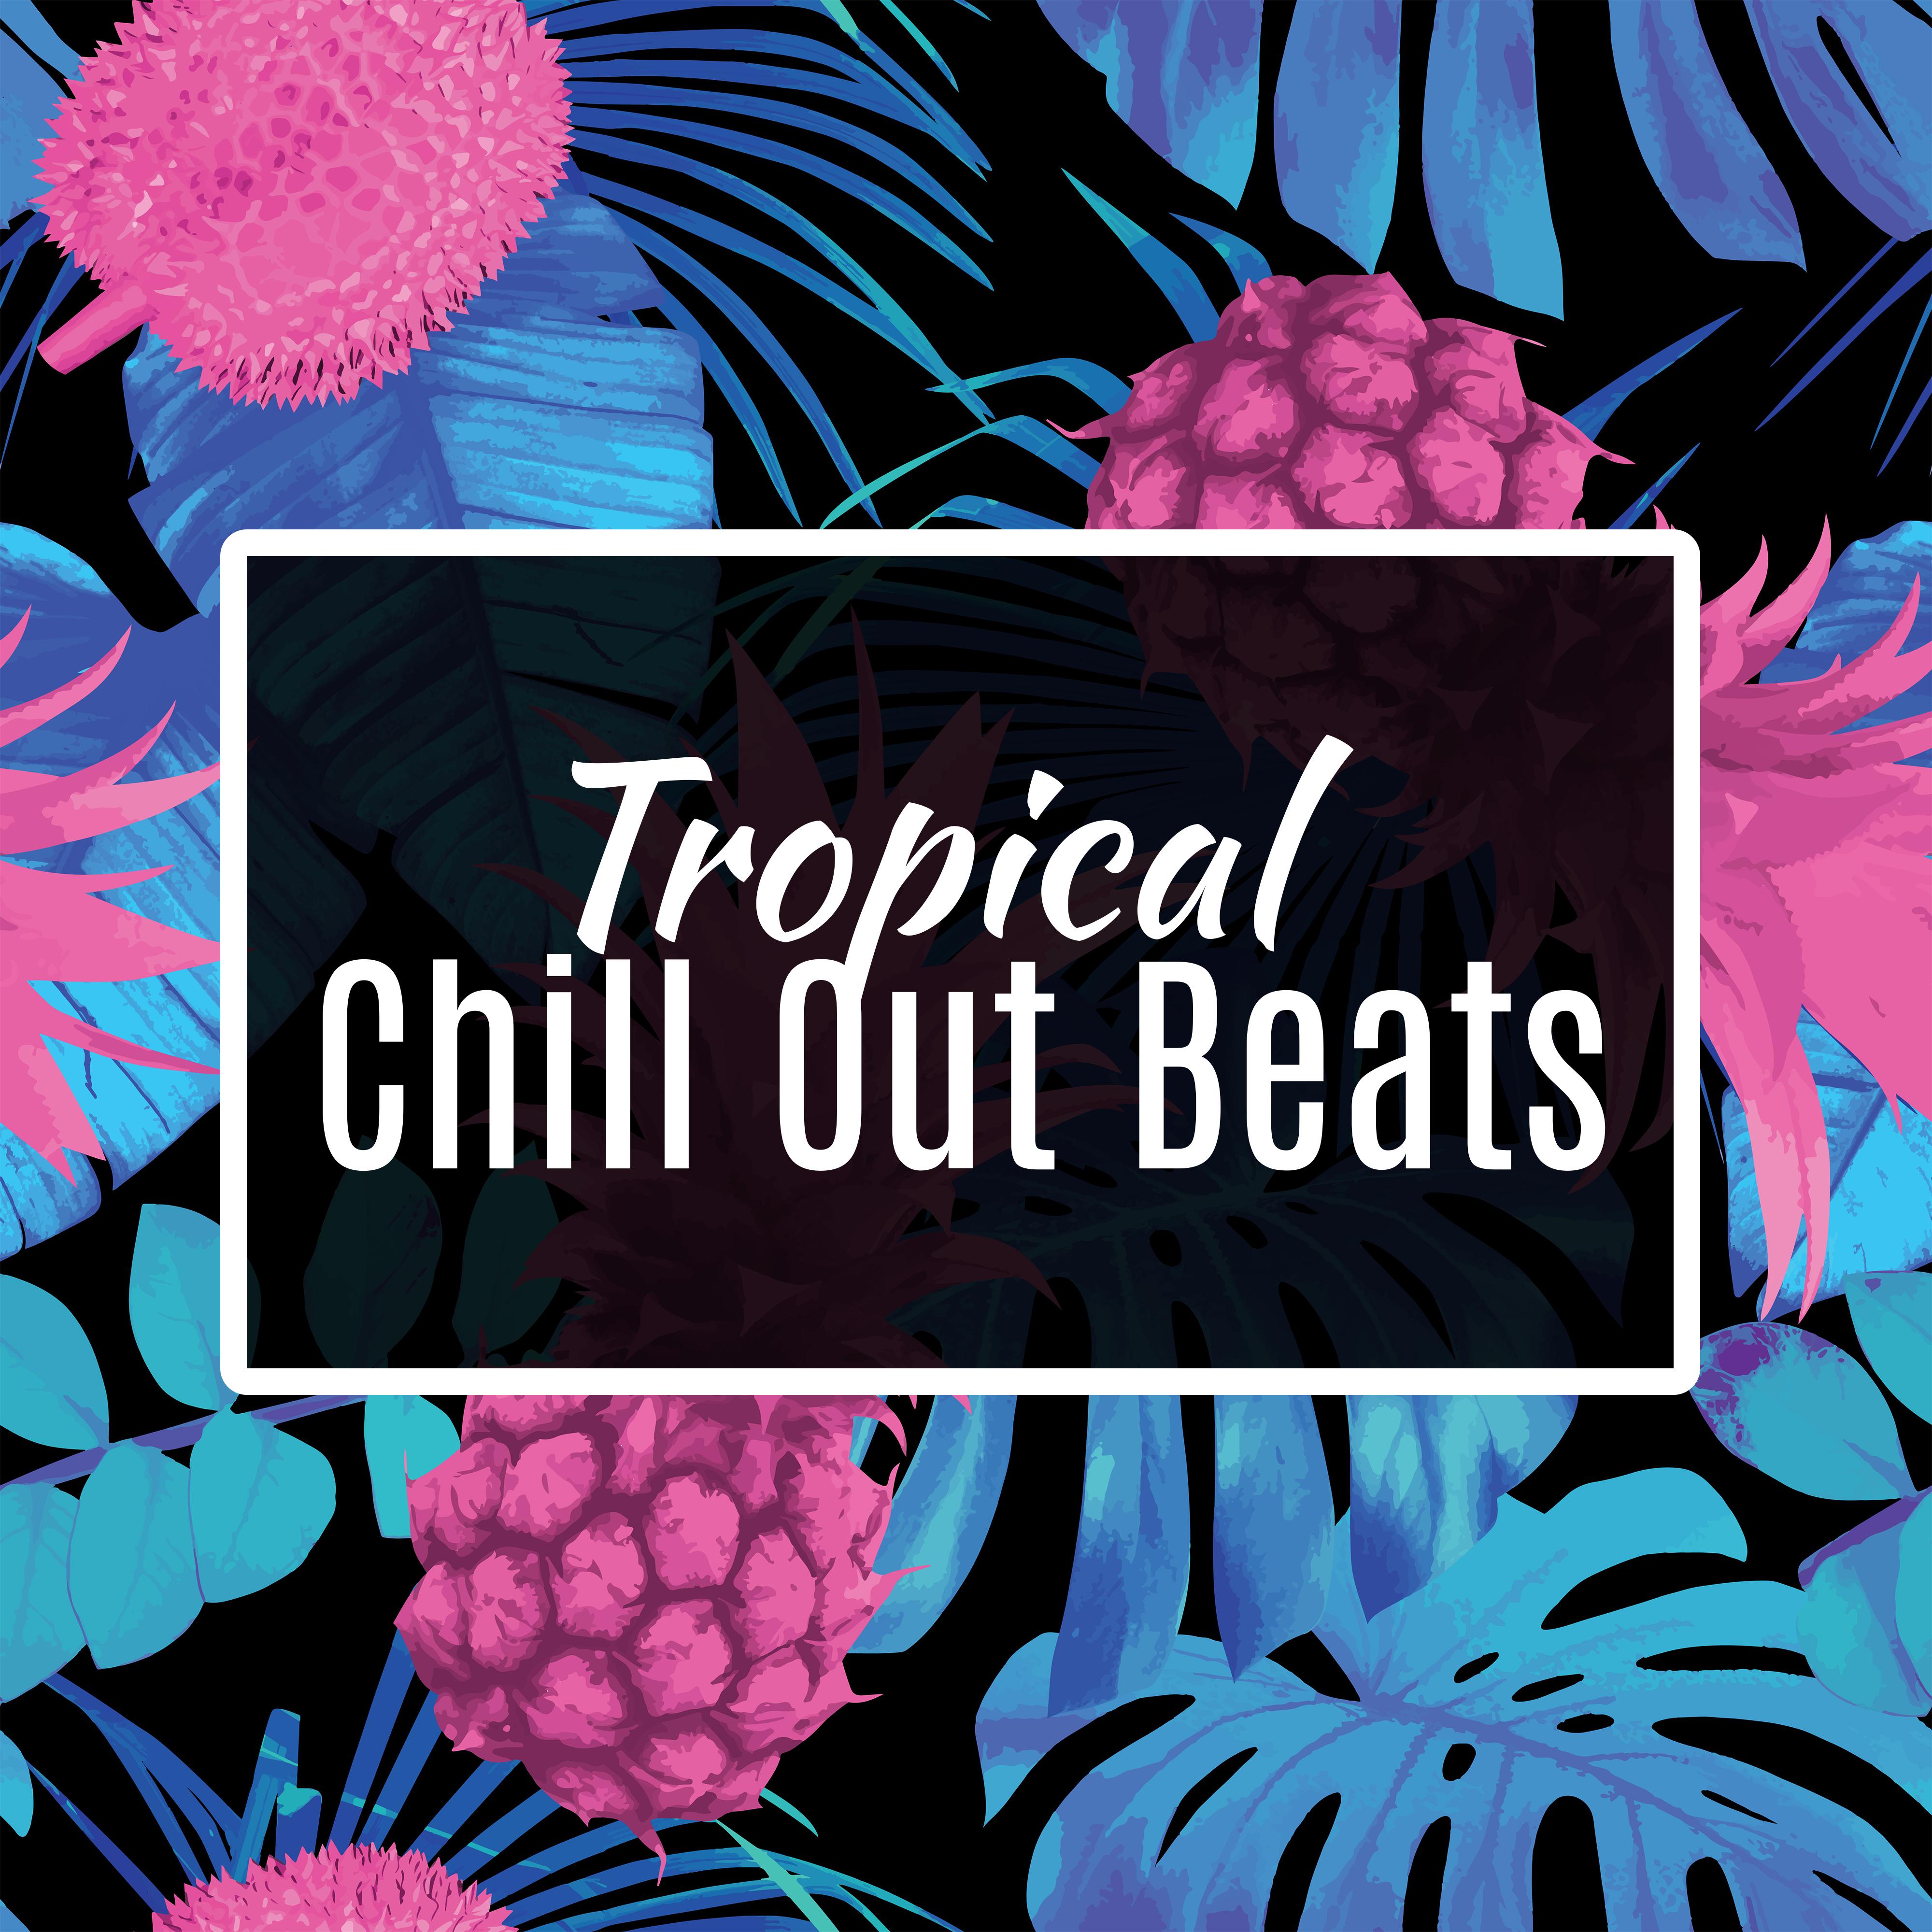 Tropical Chill Out Beats